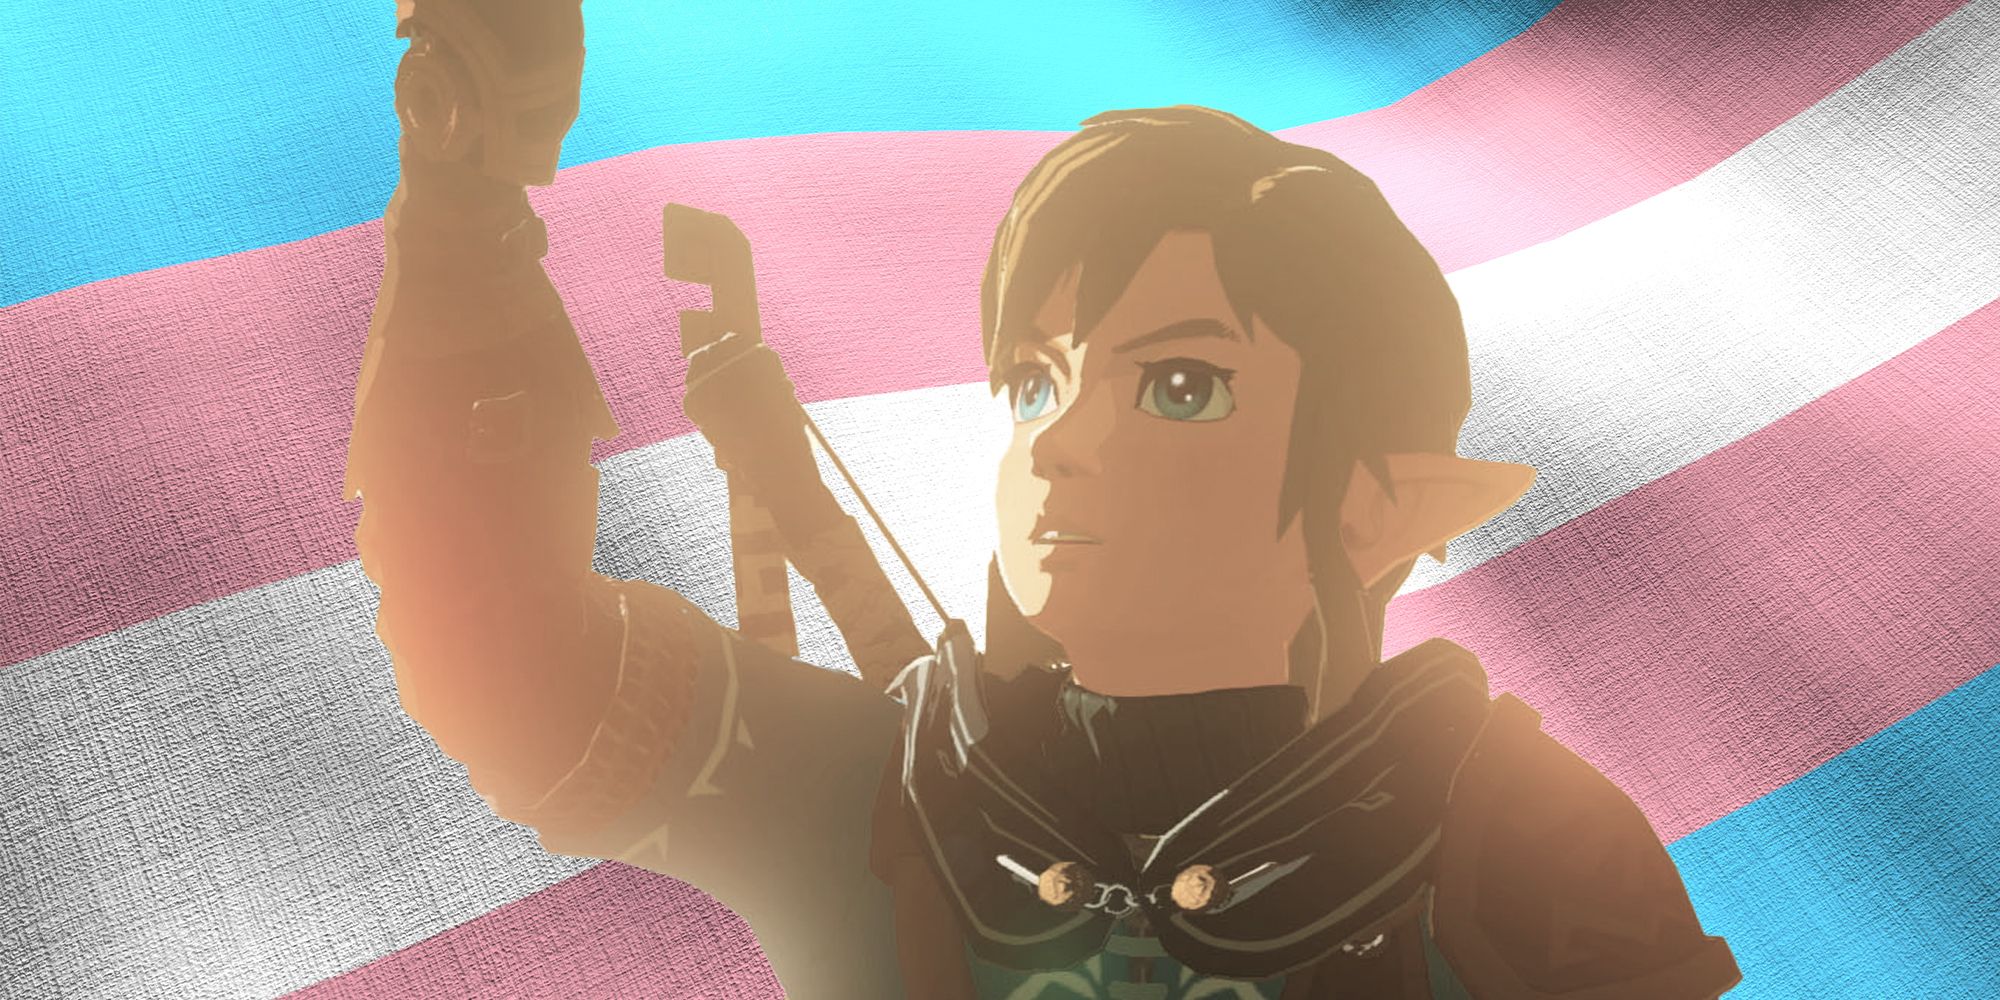 Link From The Legend of Zelda Is a Trans and Nonbinary Icon